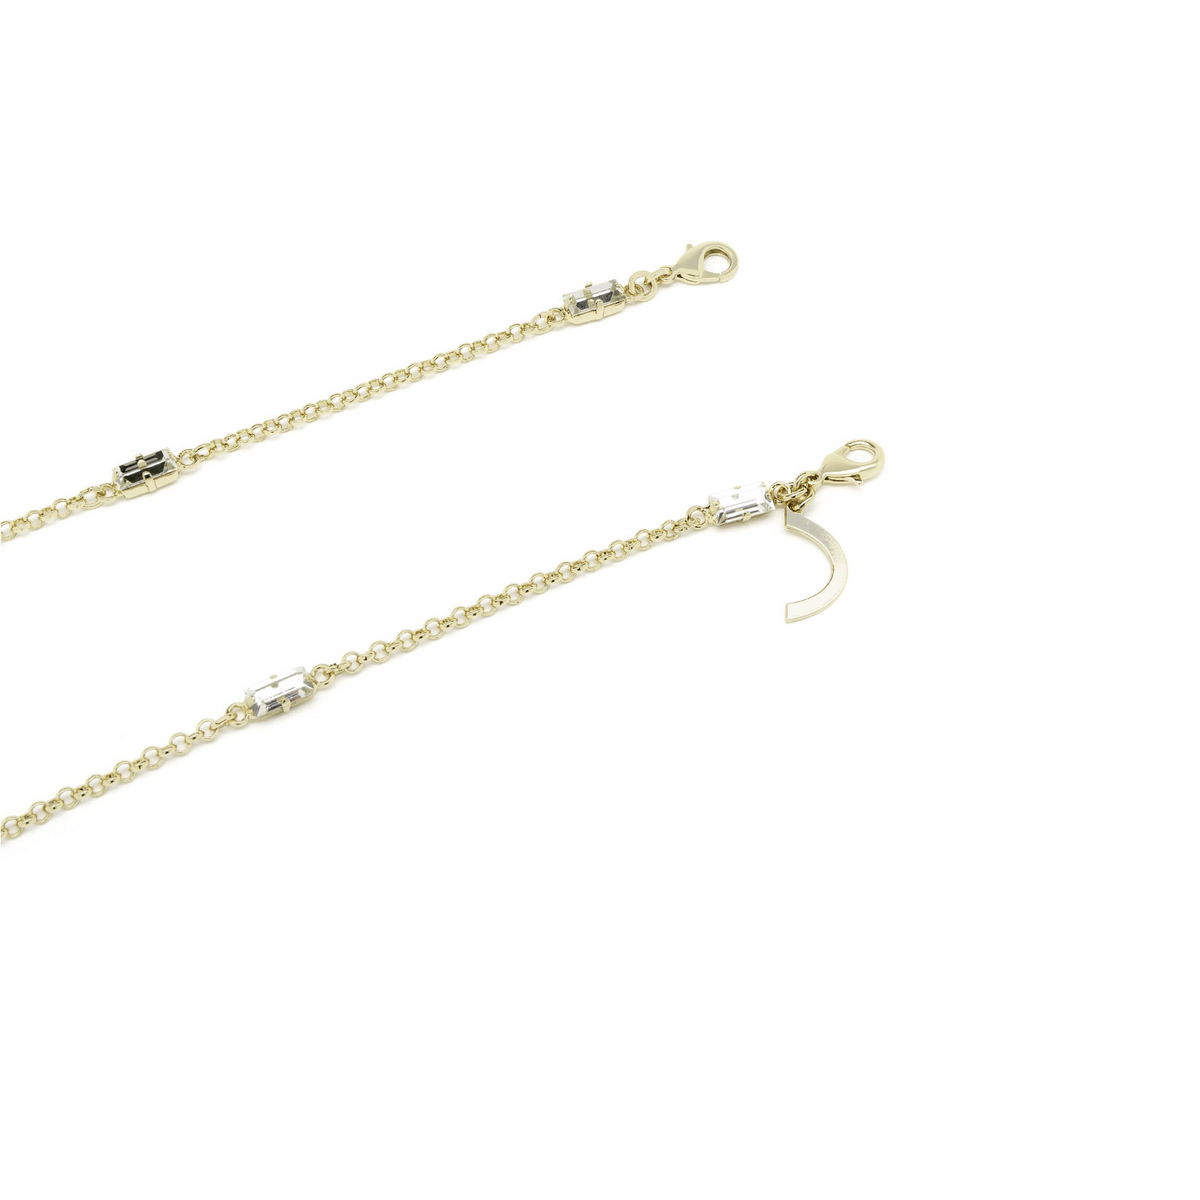 Huma® Accessories: Baguette Strass Chain color Gold S05 - front view.